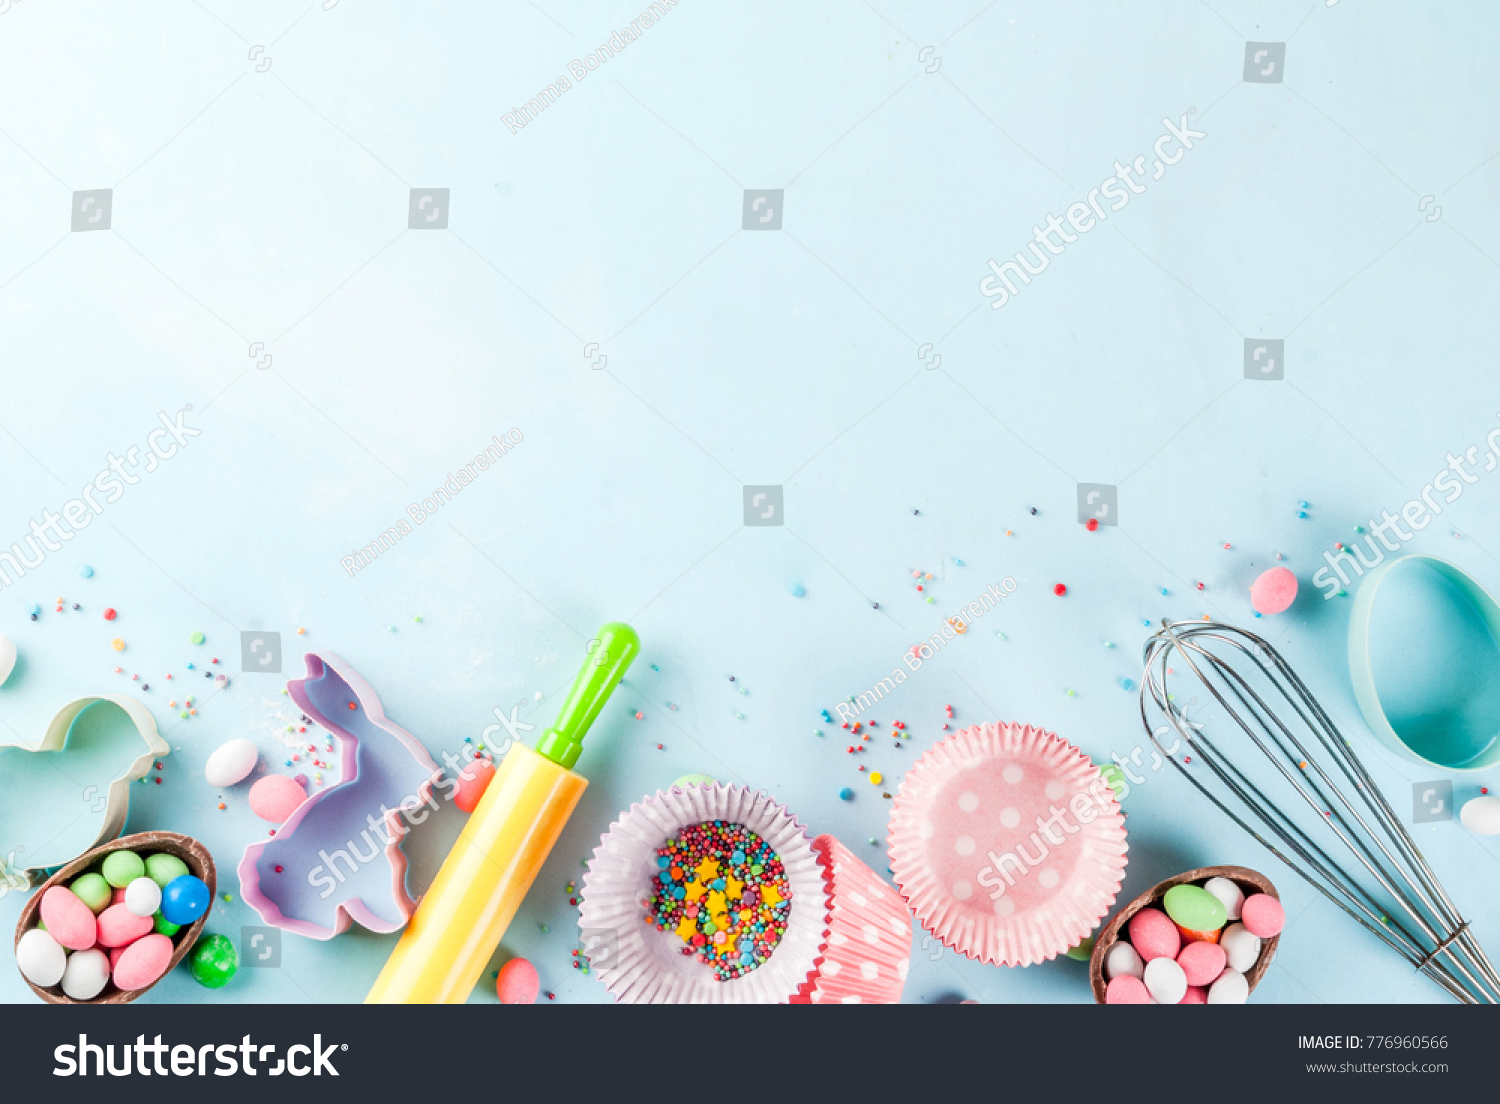 Sweet baking concept for Easter,  cooking background with baking - with a rolling pin, whisk for whipping, cookie cutters, sugar sprinkling, flour. Light blue background, top view copy space #776960566